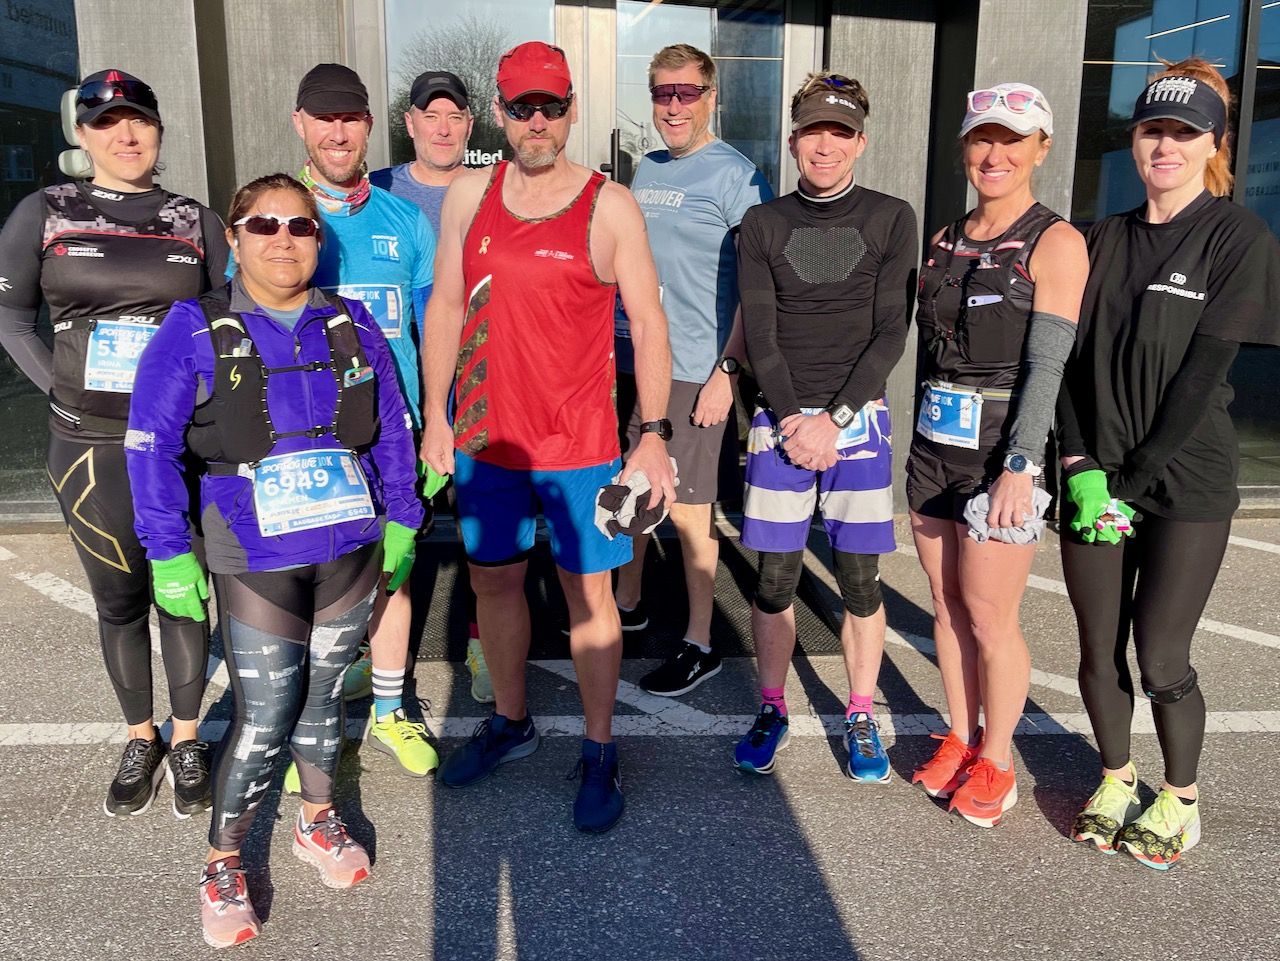 Crossfit Colossem Team at the Sporting Life 10K